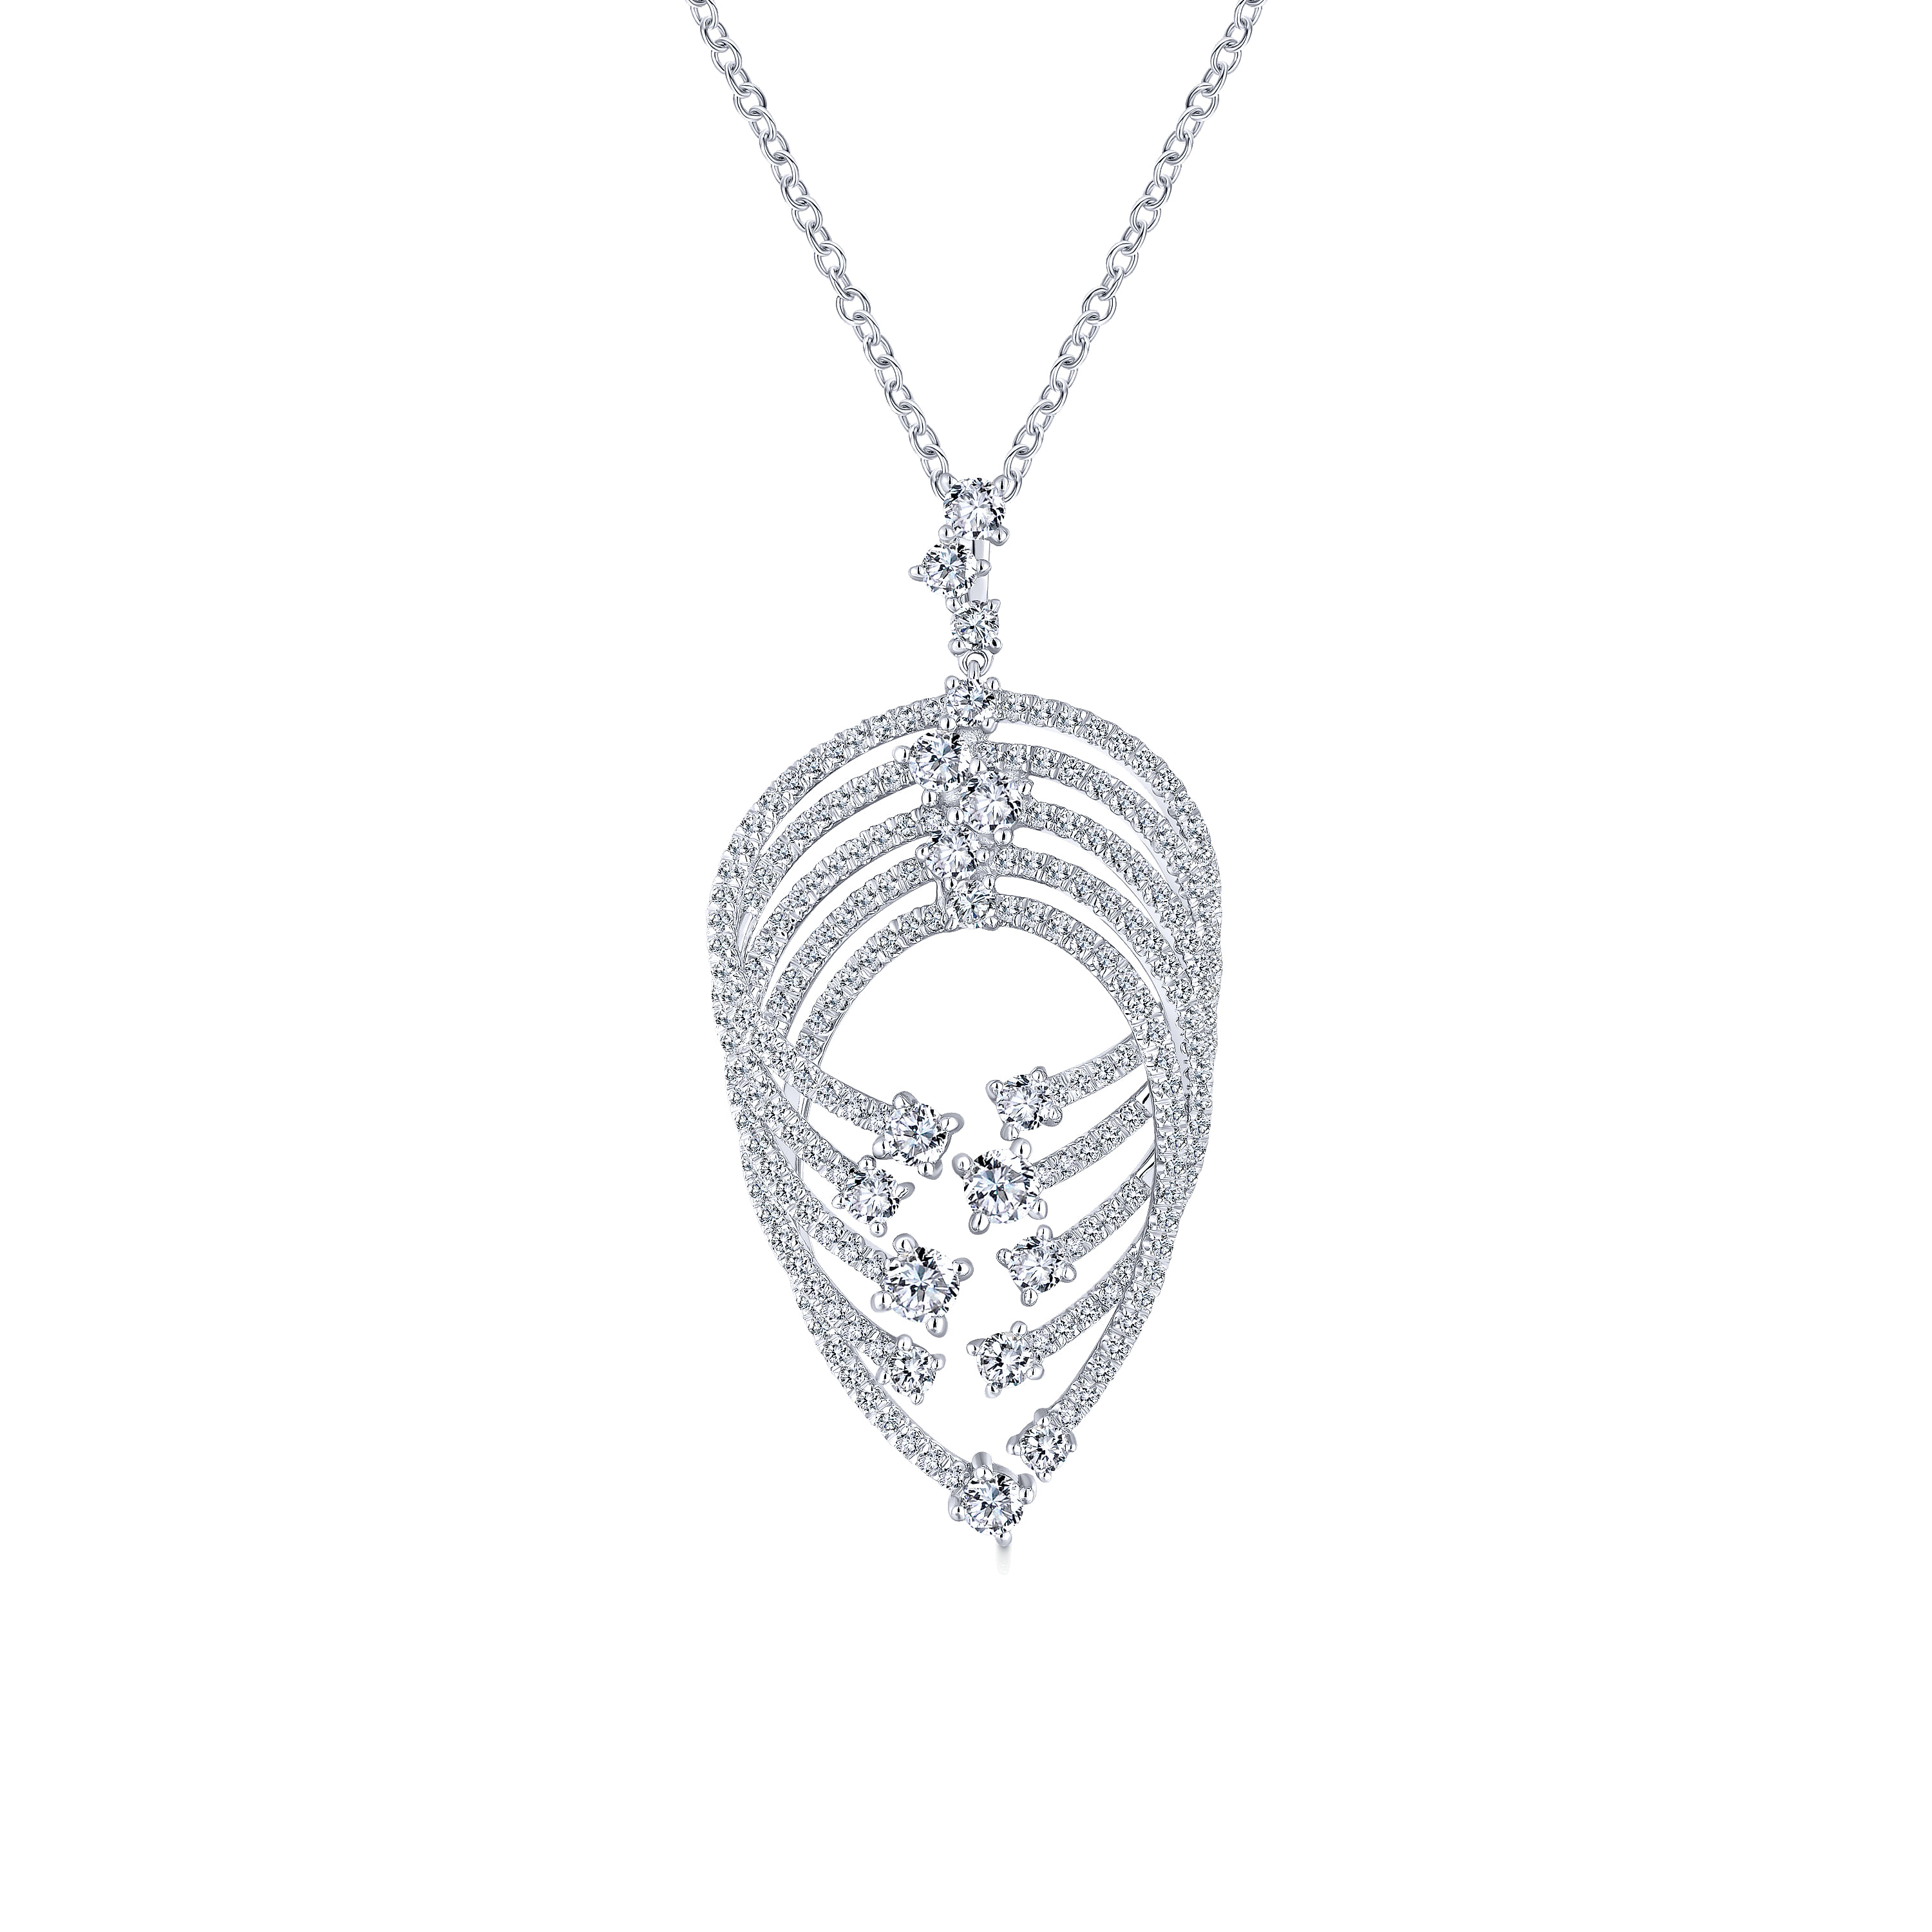 18K White Gold Intersecting Diamond Channels Pendant Necklace